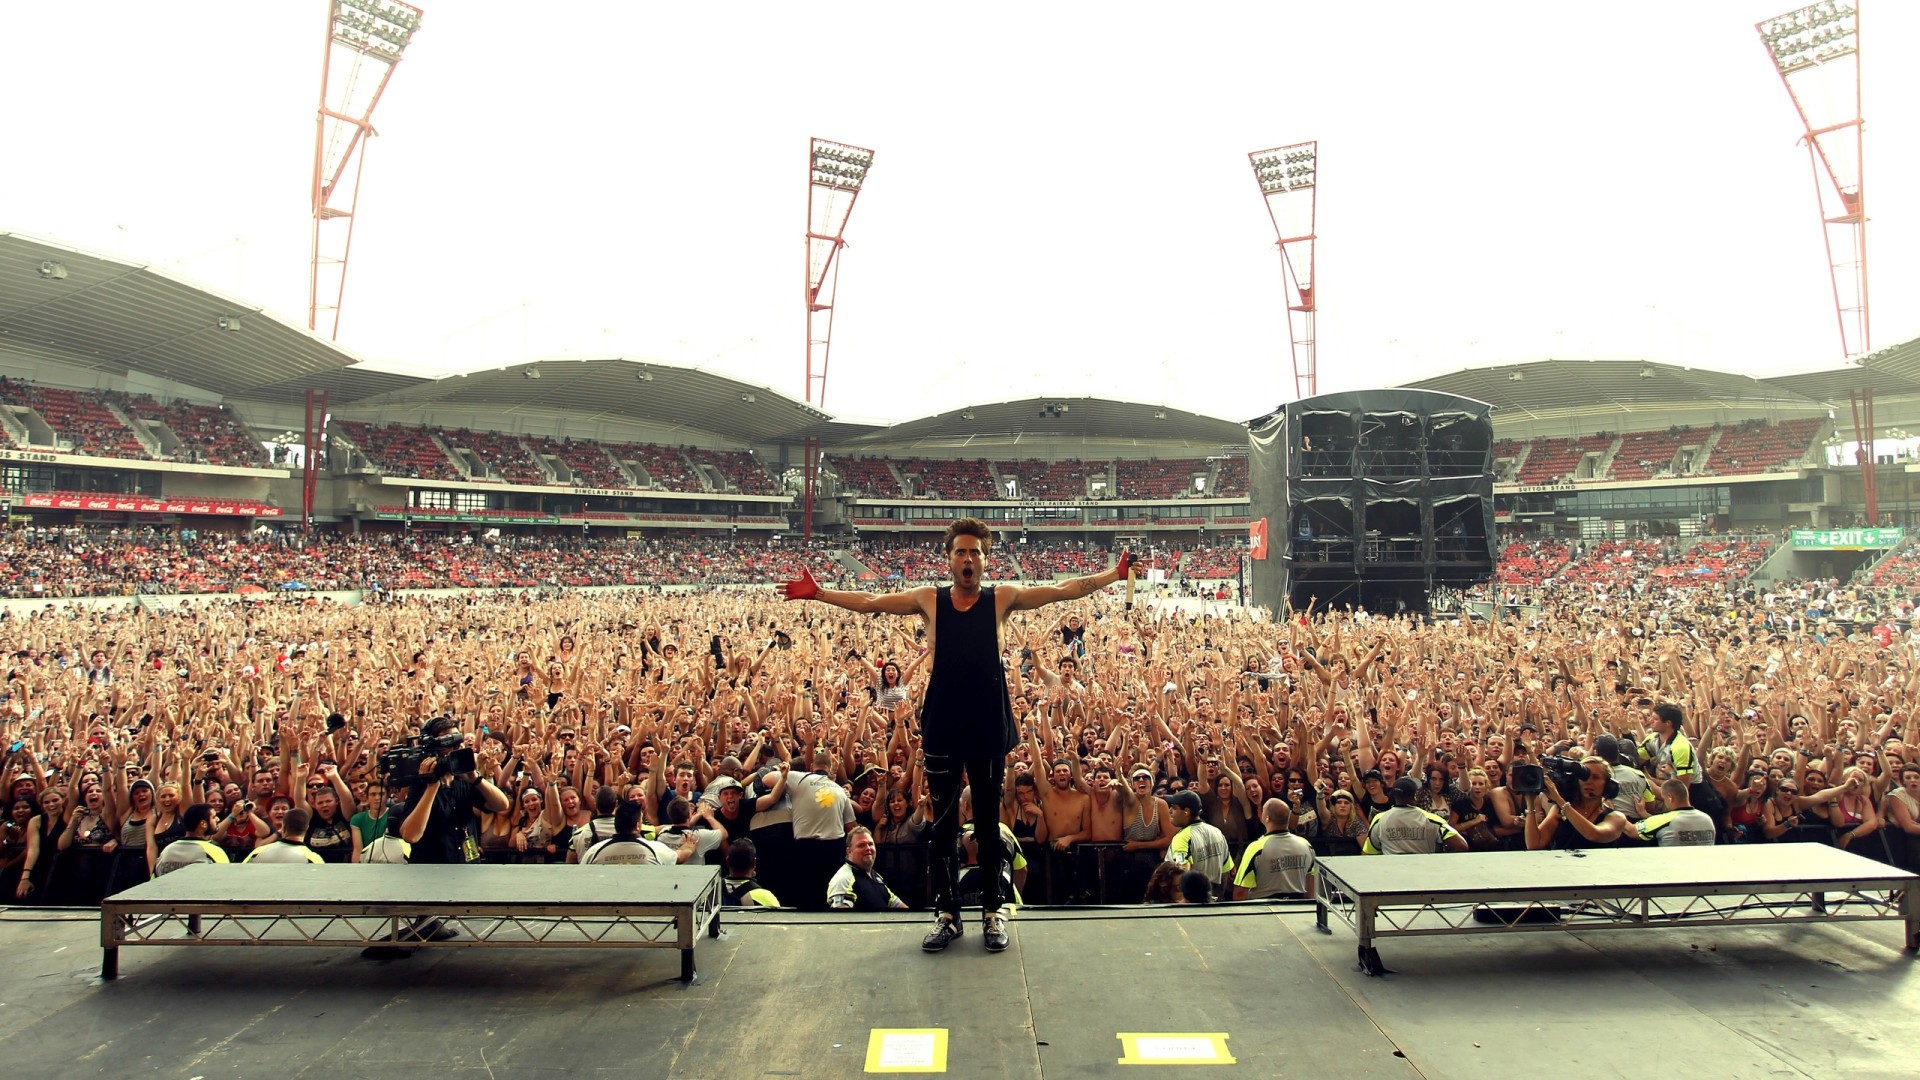 People 1920x1080 concerts crowds Jared Leto Thirty Seconds To Mars